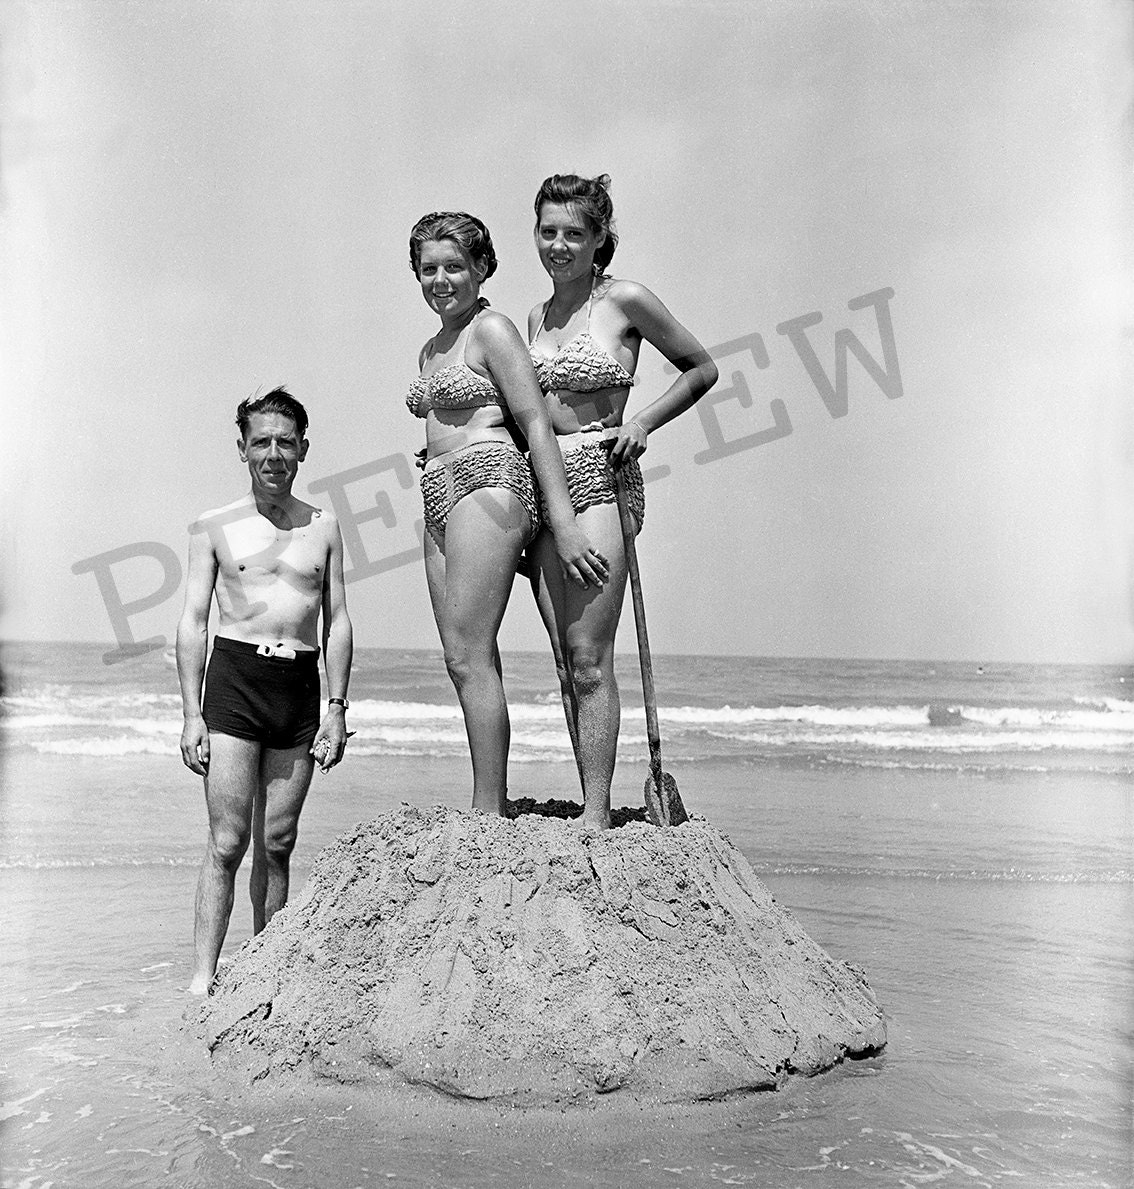 Girls on a Sand Volcano 40s Vintage Photo Instant Download pic picture